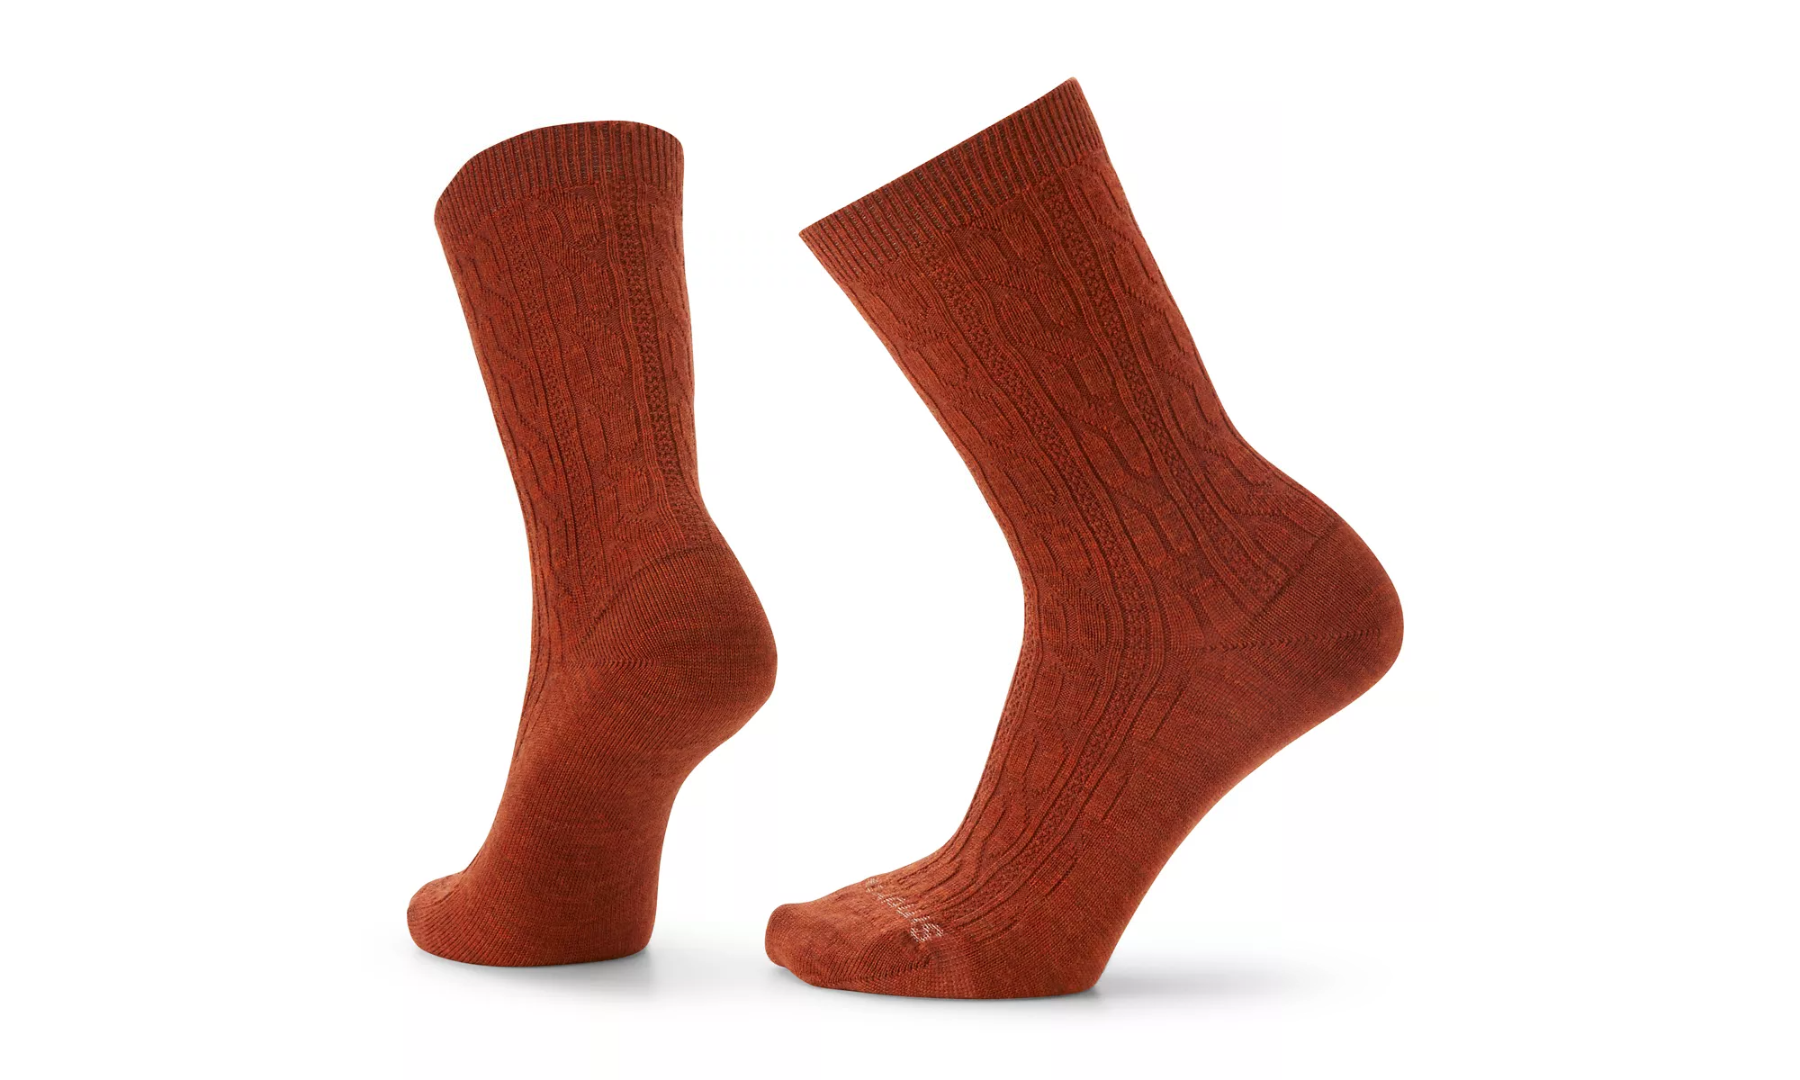 Women's Smartwool Everyday Cable Zero Cushion Ankle Socks Color:Women's Smartwool Everyday Cable Zero Cushion Crew Socks Color: Picante